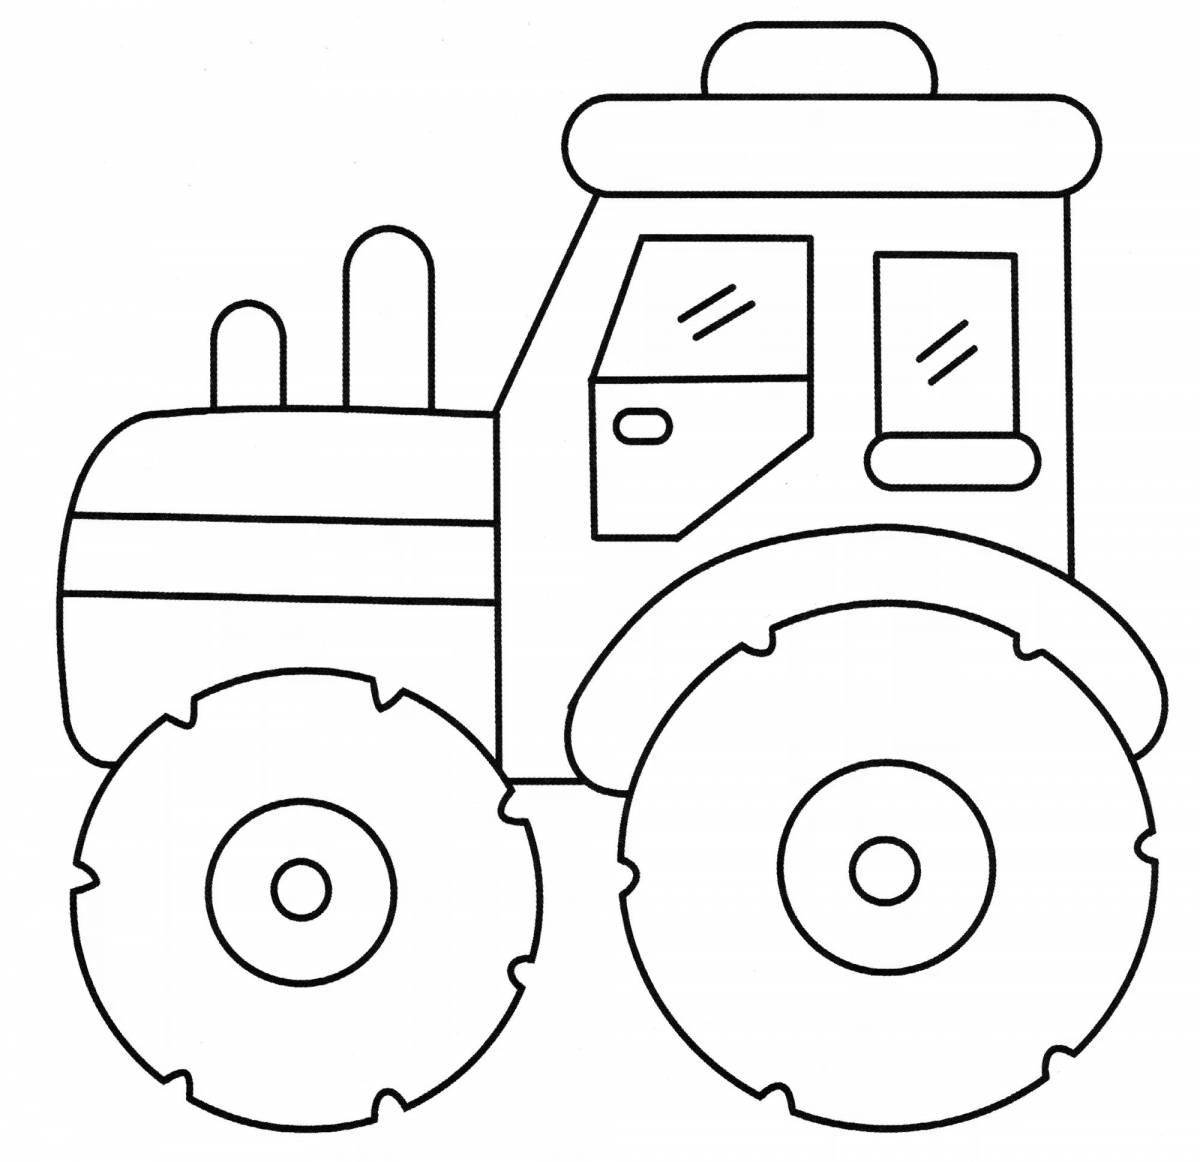 Blessed Tractor coloring book